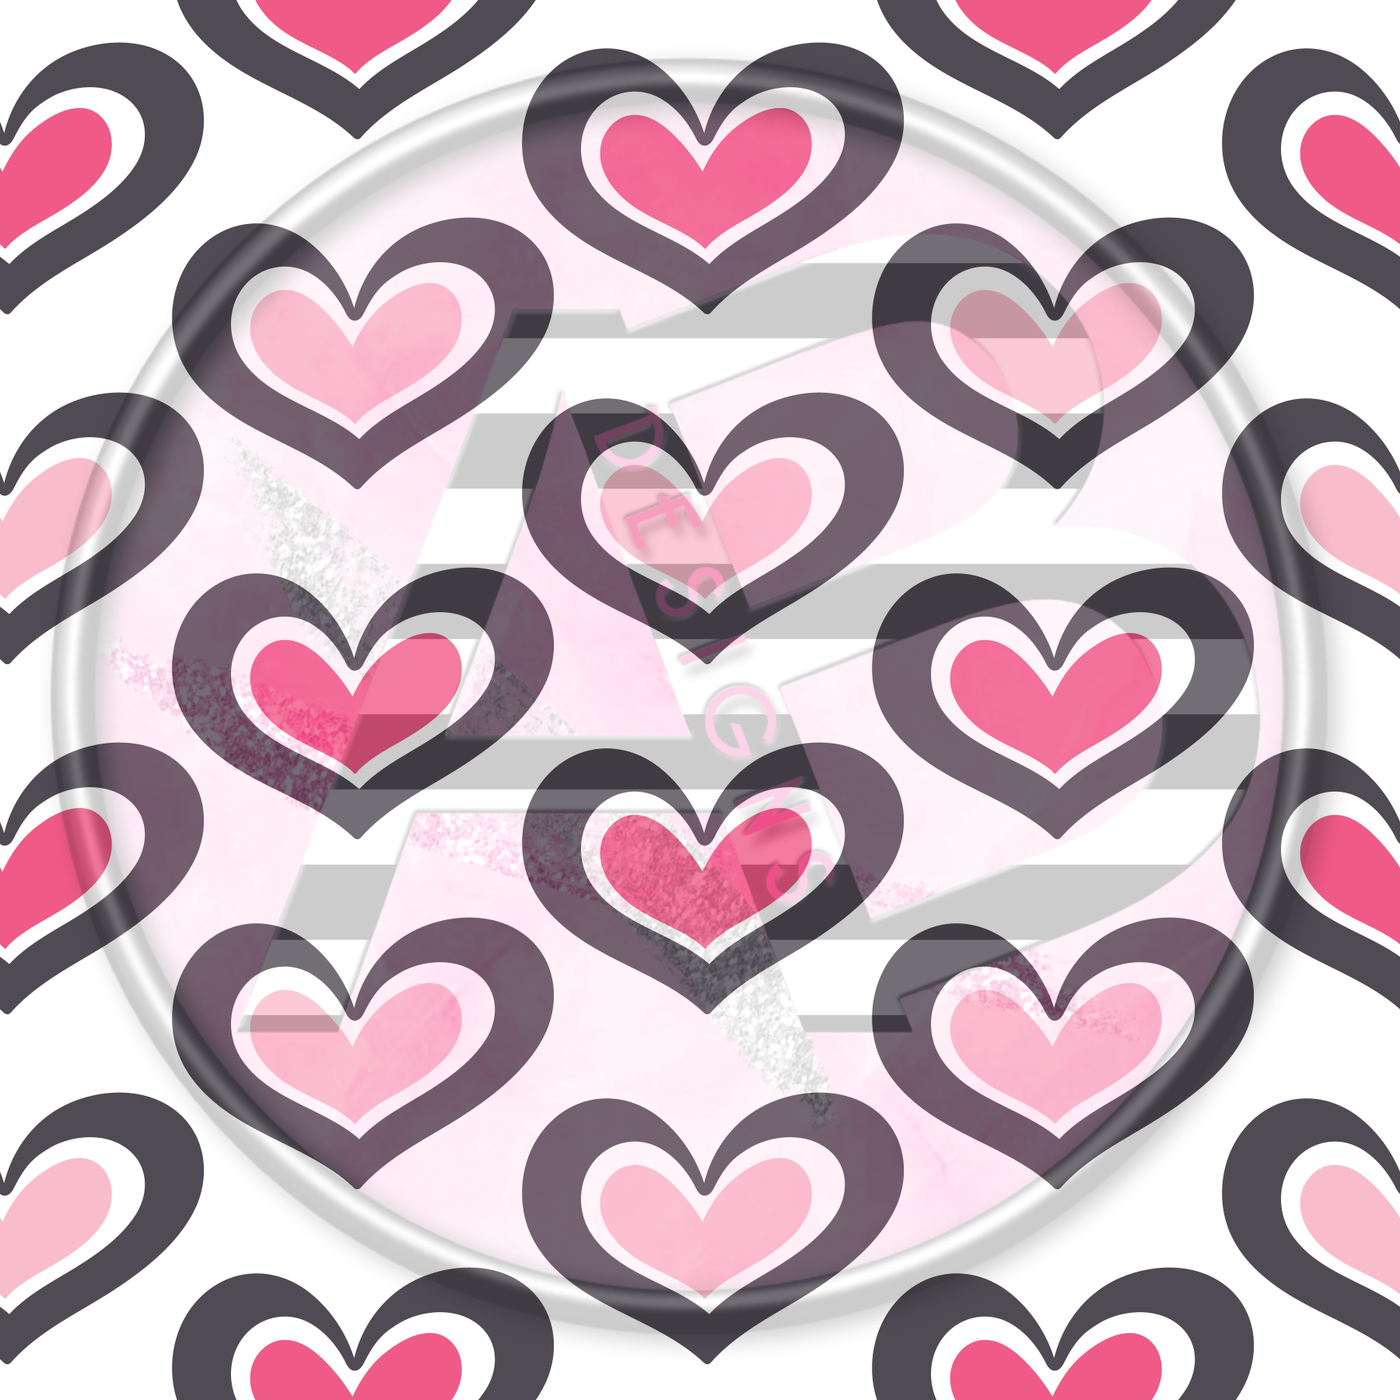 Adhesive Patterned Vinyl - Hearts 5